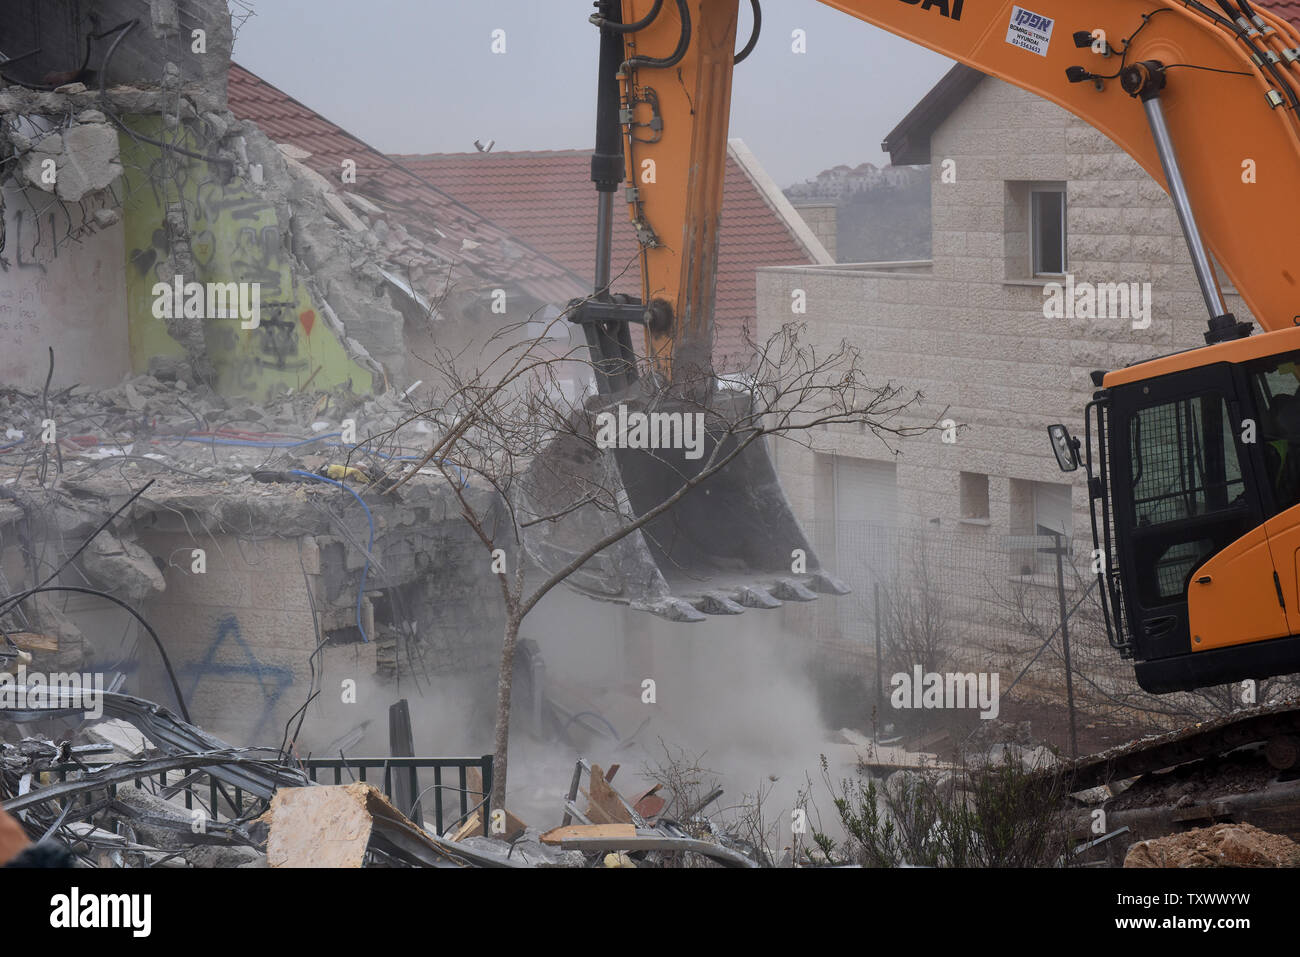 A bulldozer demolishes a Jewish house in the Ofra Settlement in the West Bank near Ramallah,  March 1, 2017. Israeli forces are demolishing nine Jewish homes in the Ofra Settlement after the Supreme Court ruled they were  built on private Palestinian land.  Photo by Debbie Hill/UPI Stock Photo